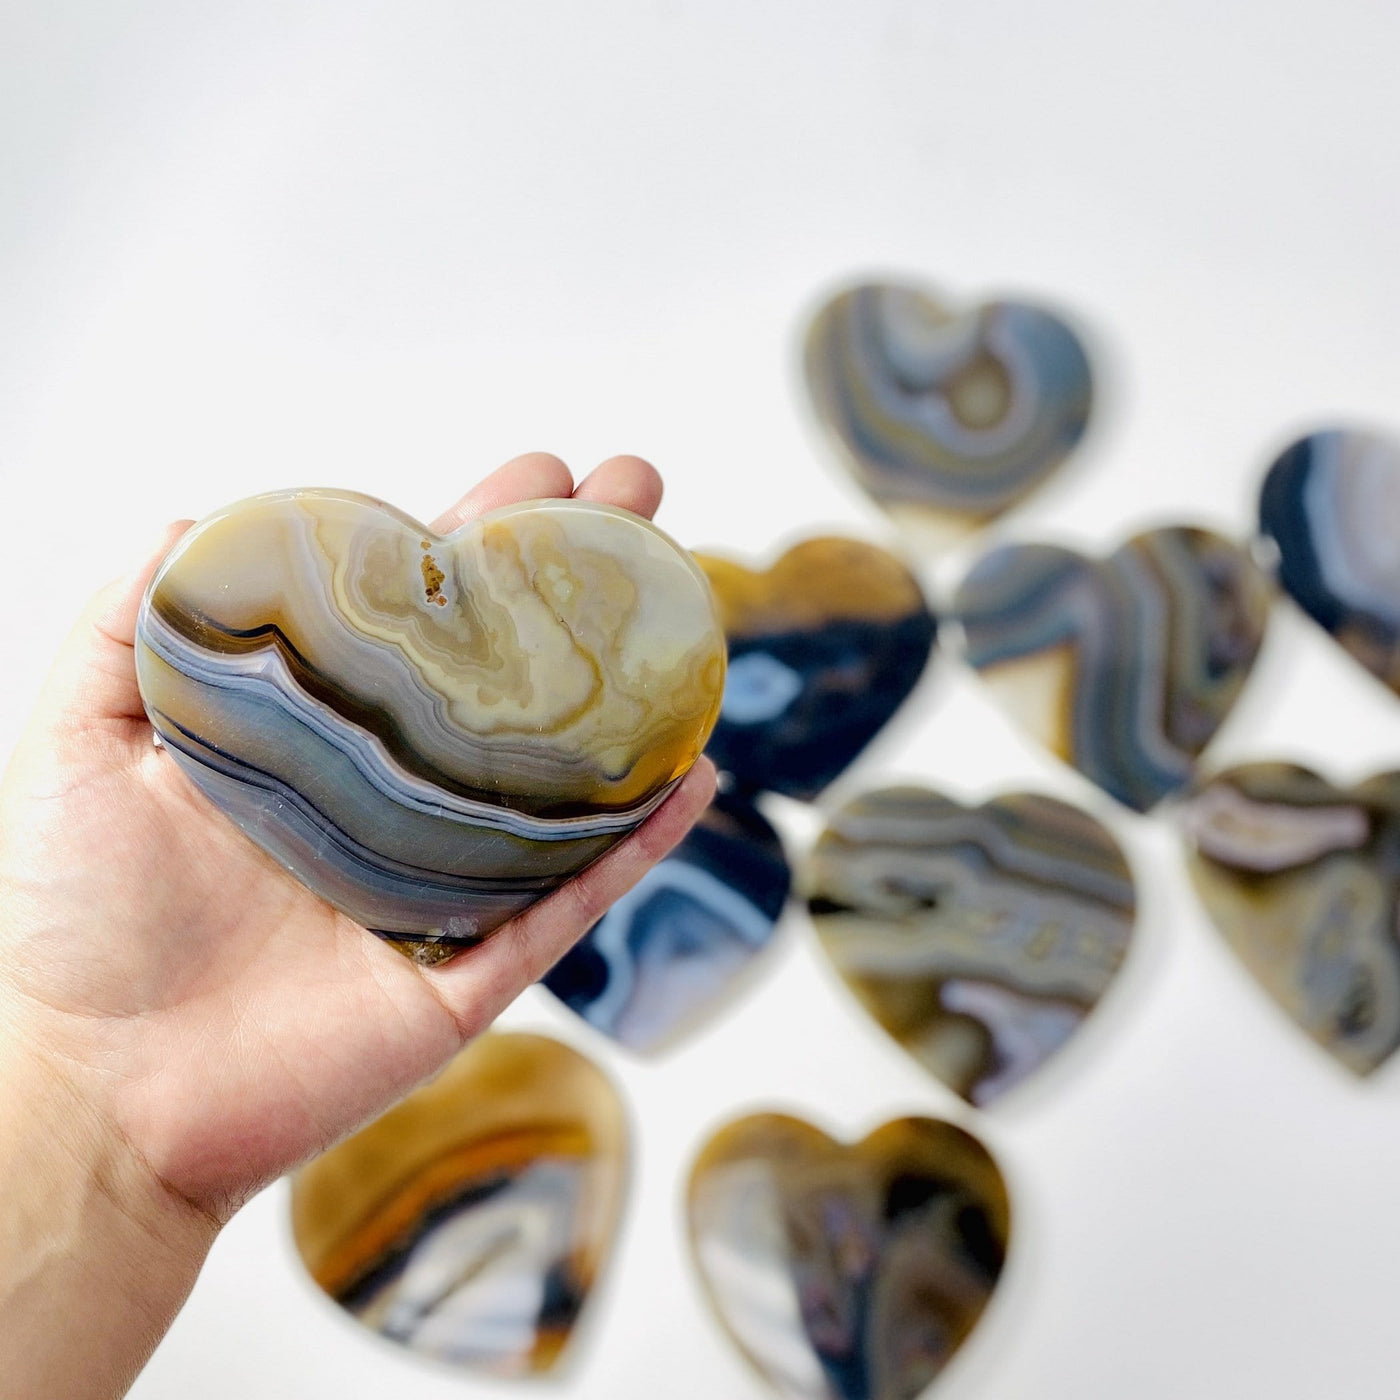 Natural Agate Heart Slice held in hand while others remain out of focus